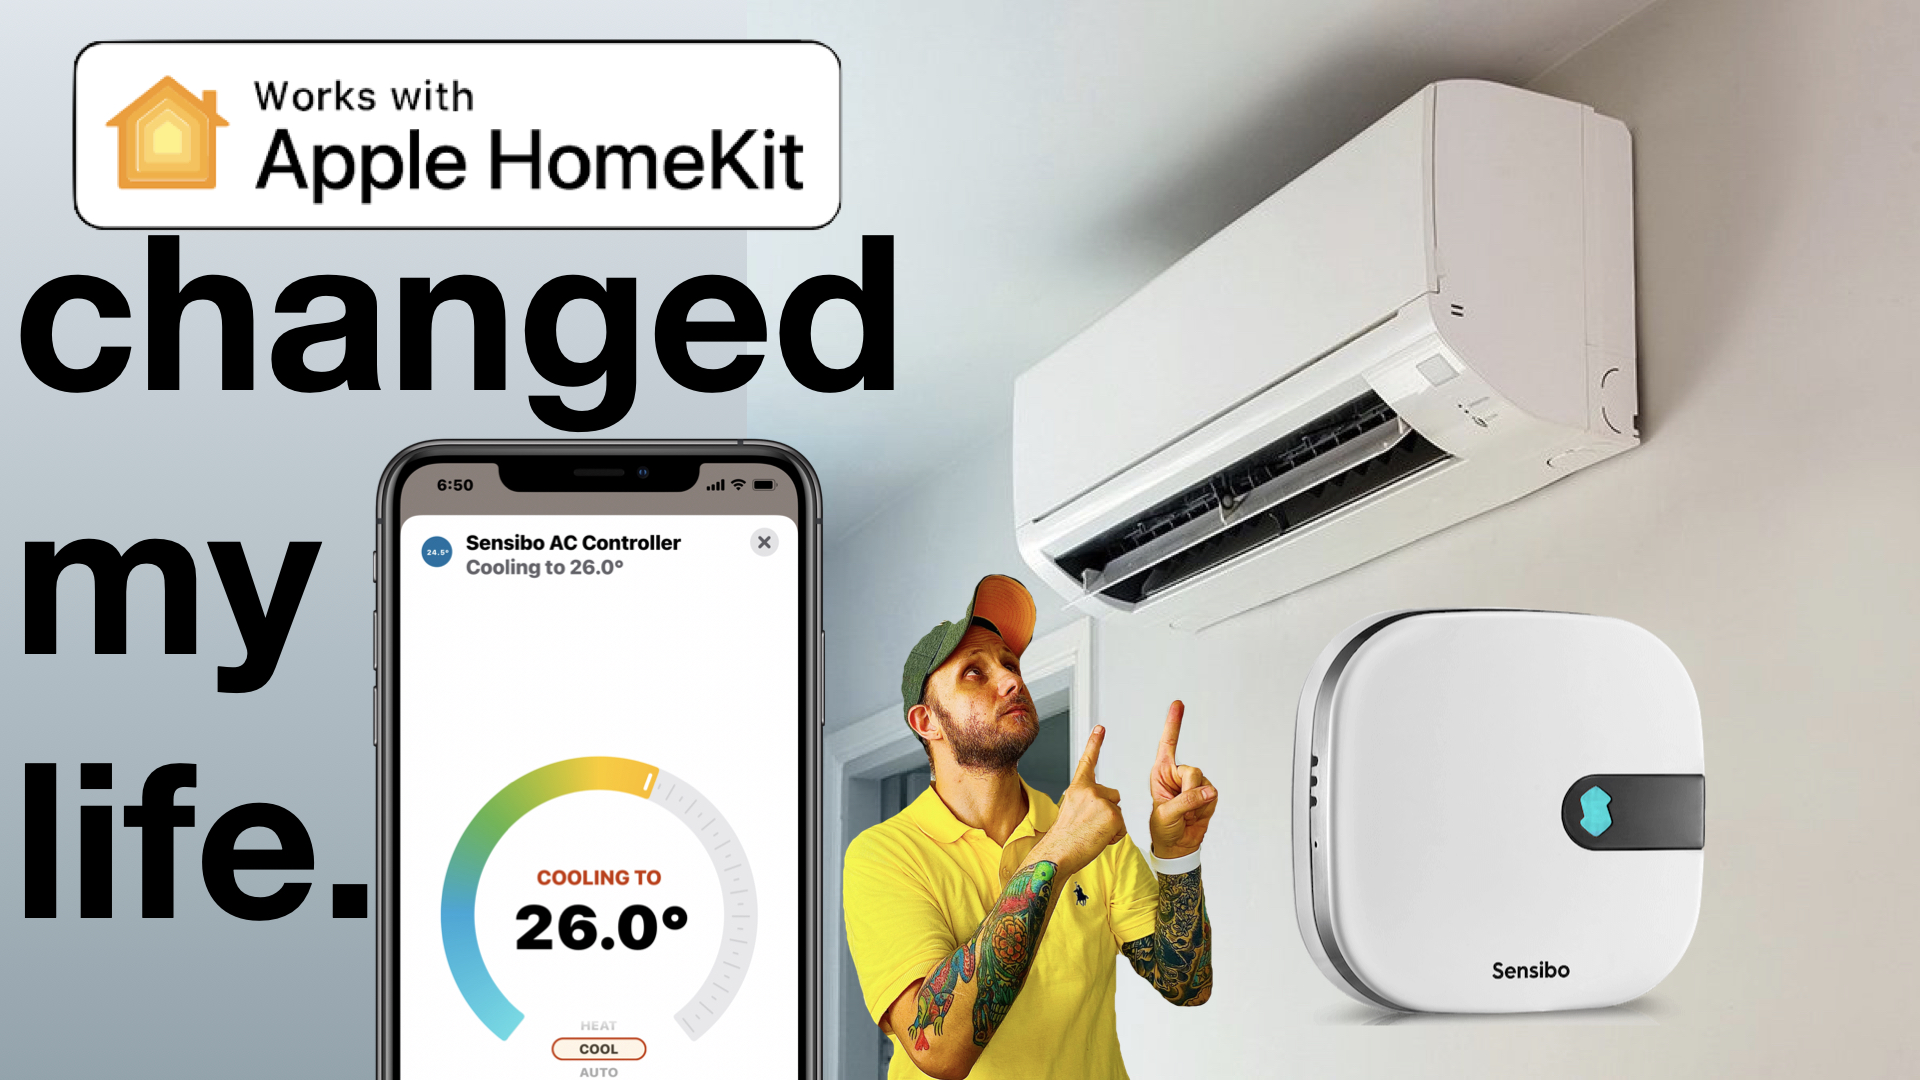 Device Management Suite for Daikin Smart Thermostats and Indoor Air Quality  Sensors